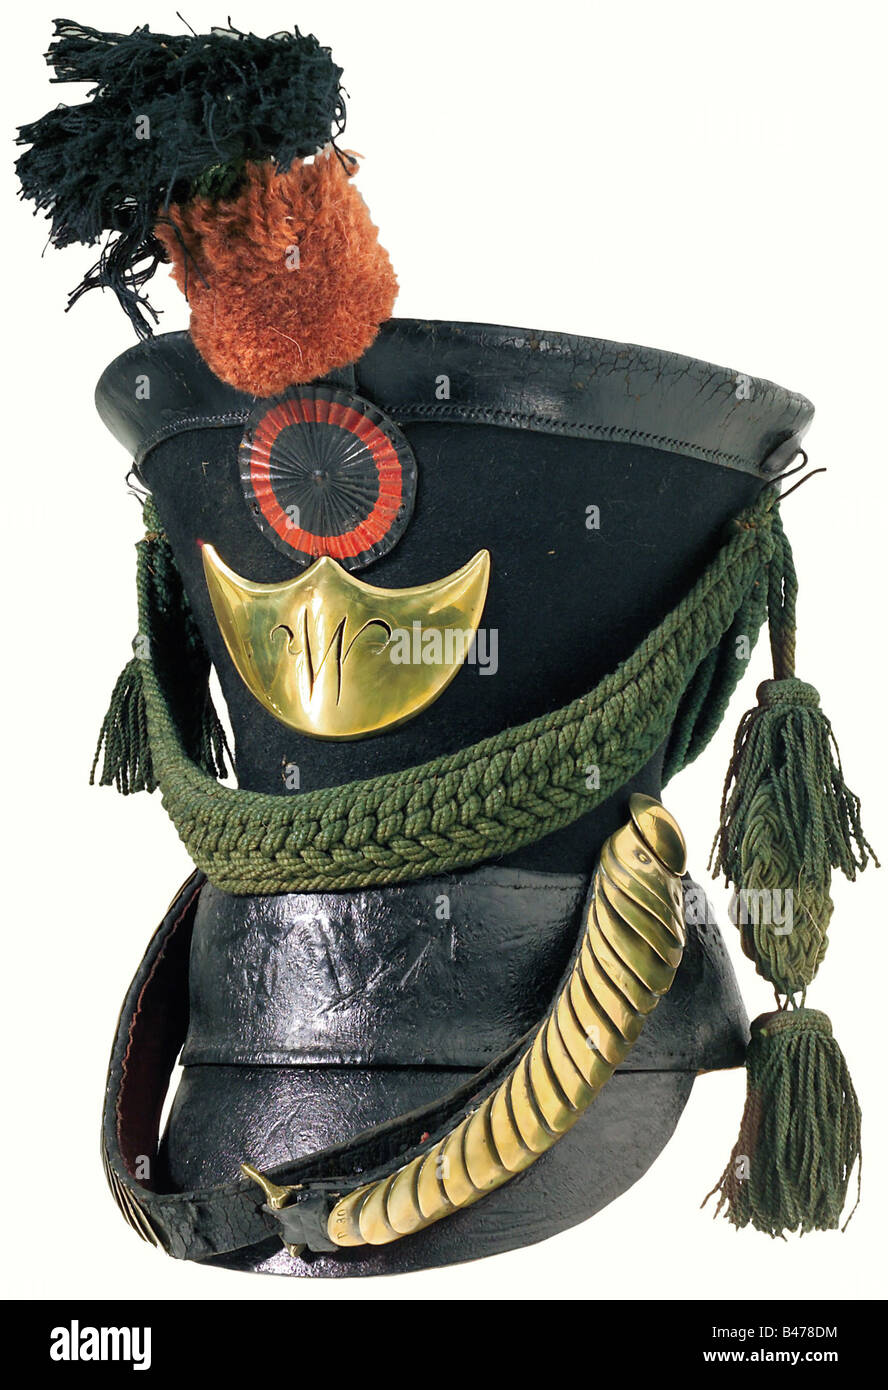 Wuerttemberg: A Jäger shako of 1821 pattern., Body of black felt, with a leather top, a wide lower band and a frontal peak (slightly loosened). Brass plate bearing the cut-out cypher 'W'. A leather cockade sits above this, topped by a pompom of red wool with a black upper part. The cords are green. Cambered chinscales with a stamp mark on each end. Brown leather liner with signs of wear and ageing. Size 54. A rare item, of a type worn until 1849. historic, historical, 19th century, object, objects, stills, clipping, clippings, cut out, cut-out, cut-outs, Stock Photo